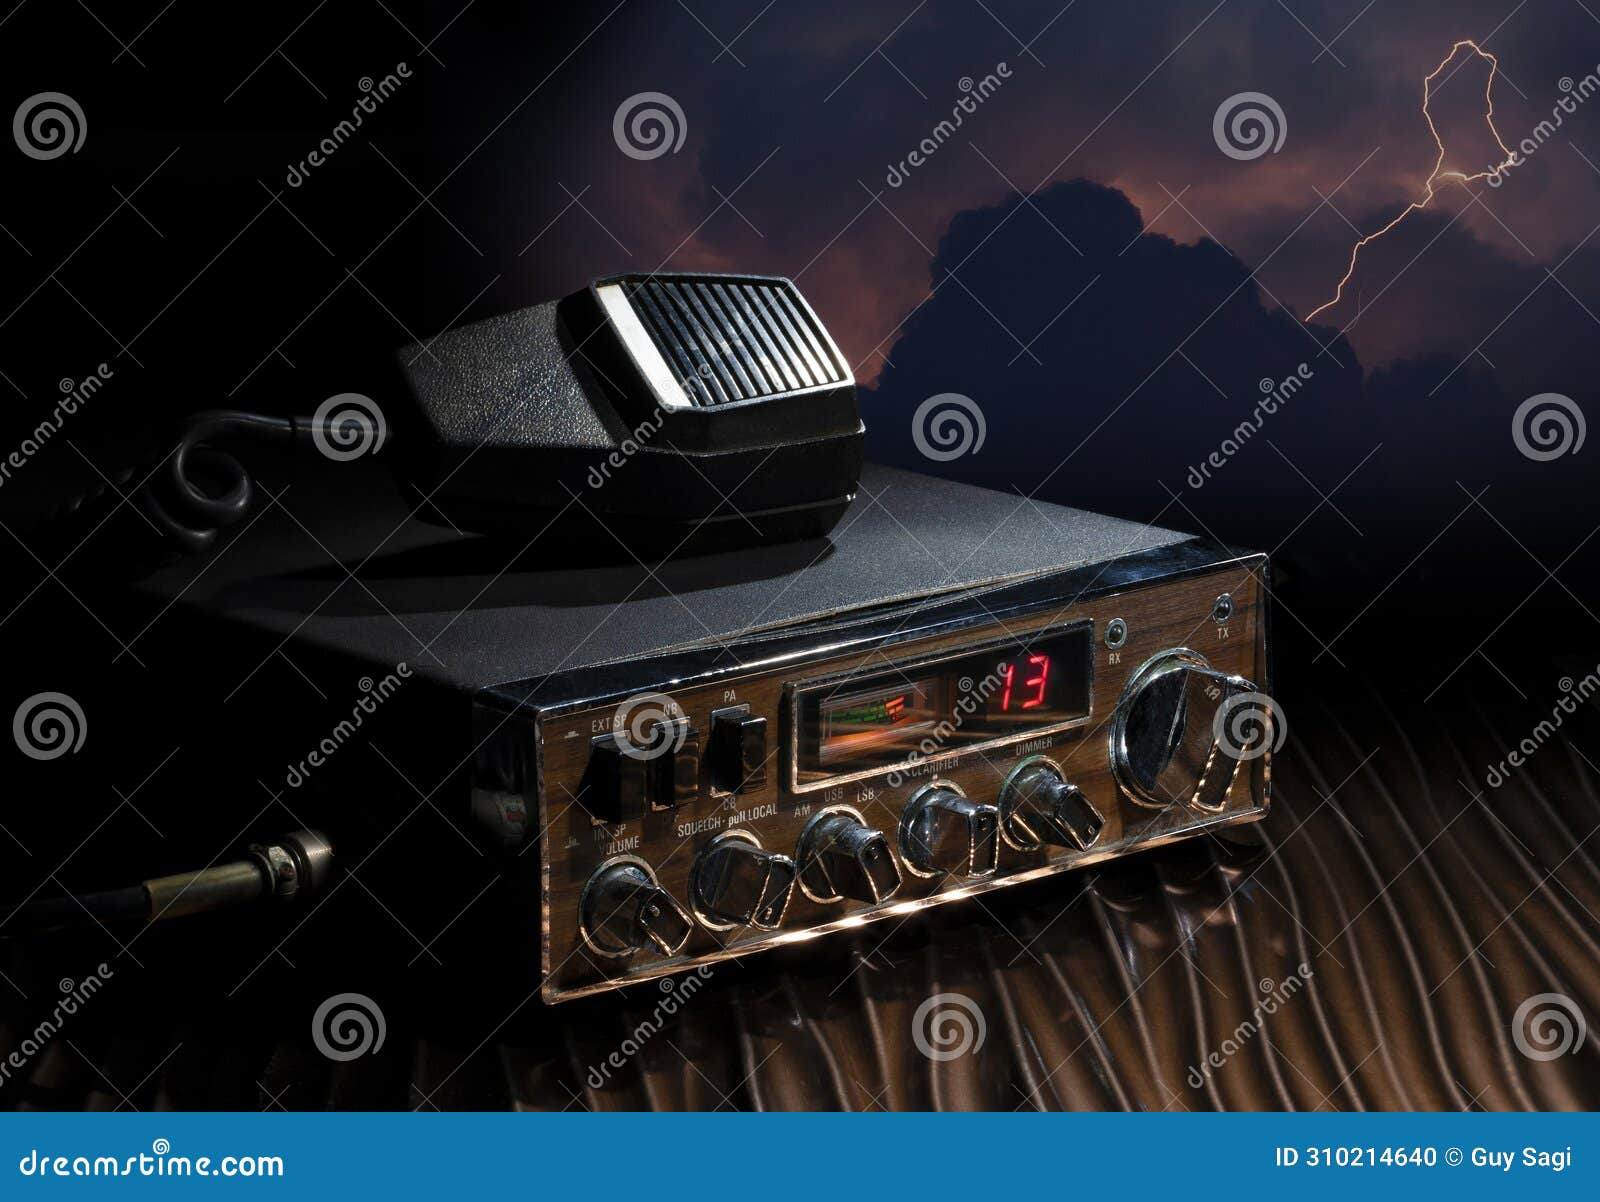 cb radio on channel 13 as a storm approaches